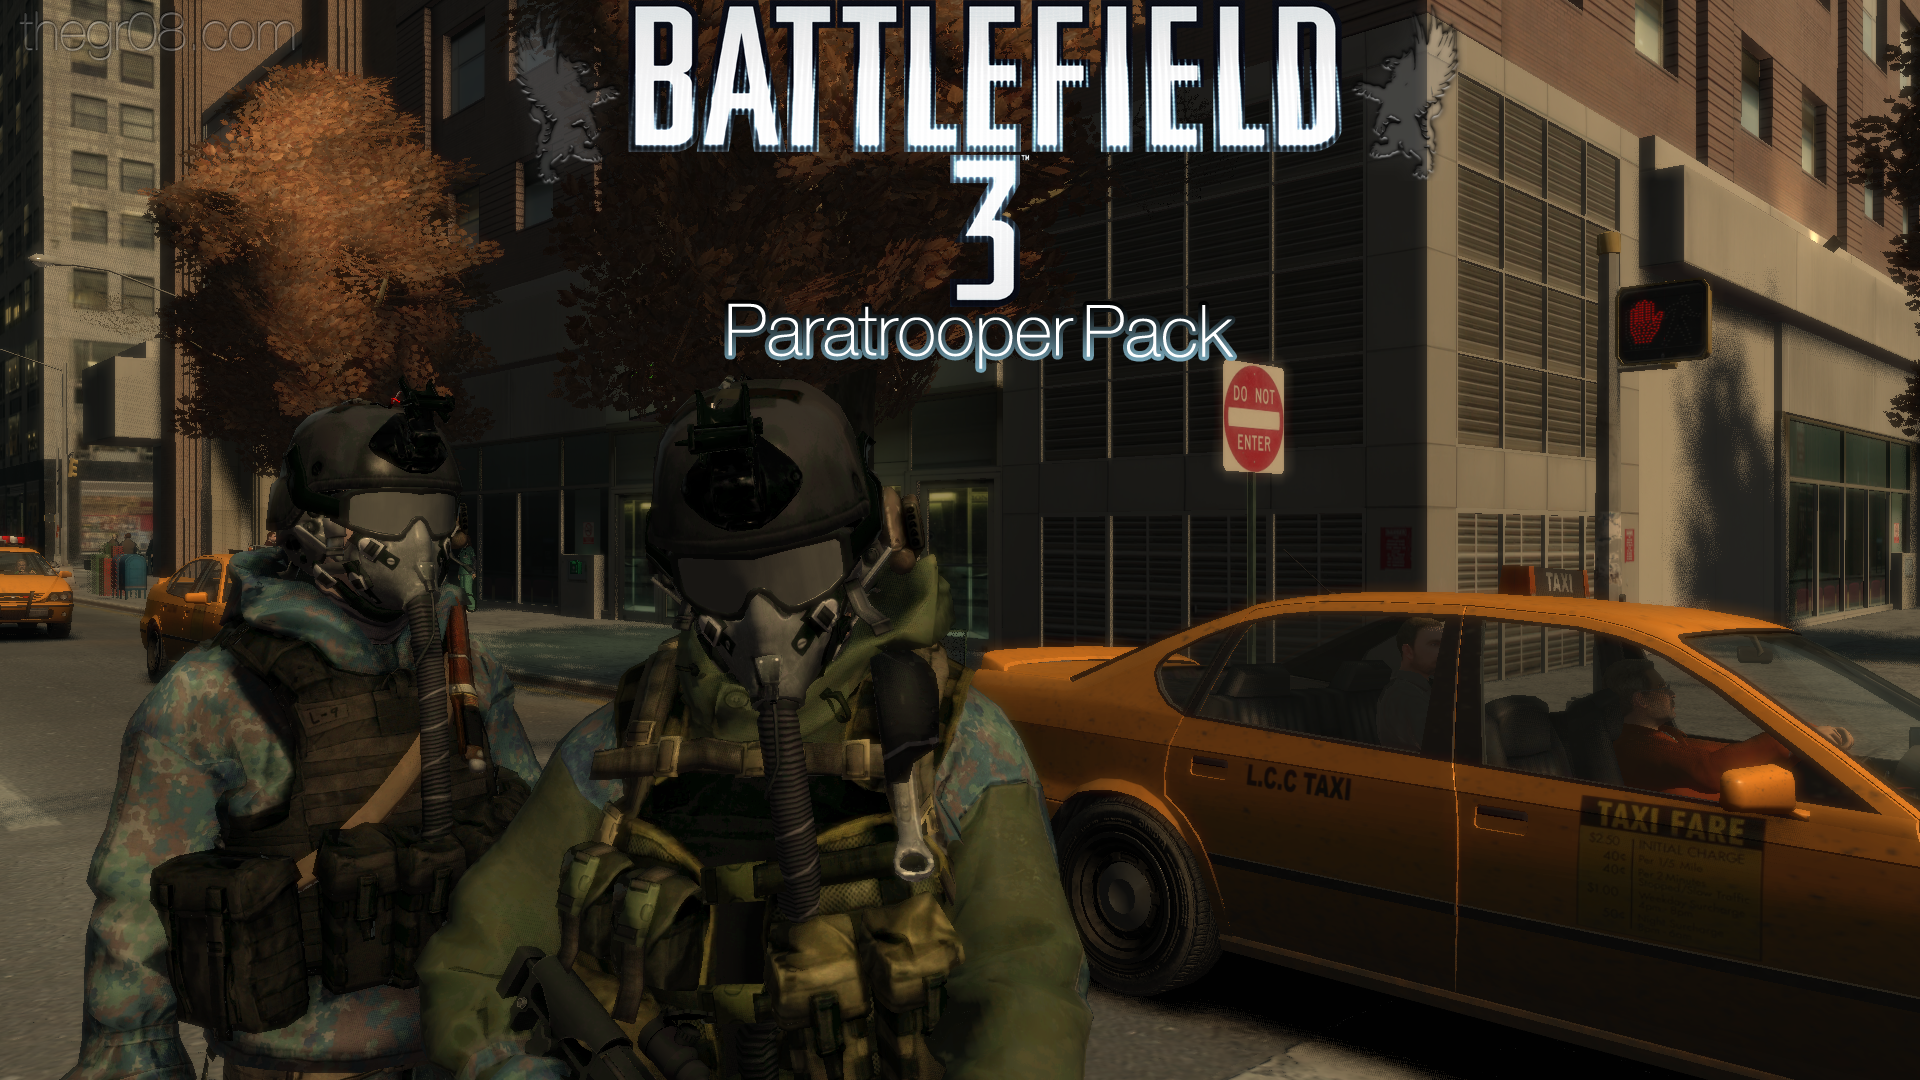 Battlefield 3 Paratroopers PACK (PEDS). by wapeddell. 